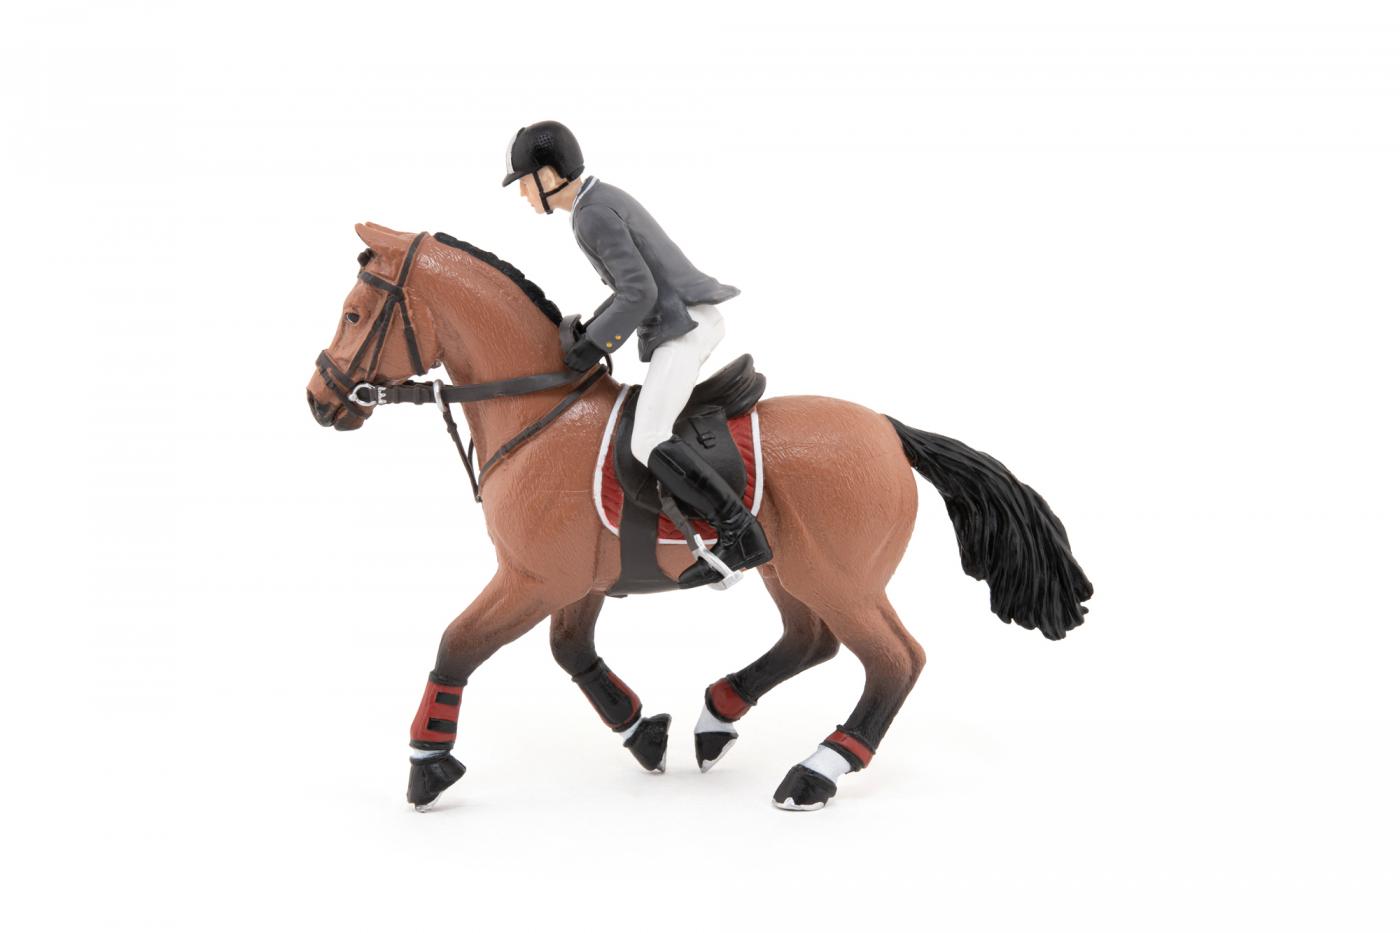 Details about   Papo 51561 Competition horse with rider with horse play set toy pony model 